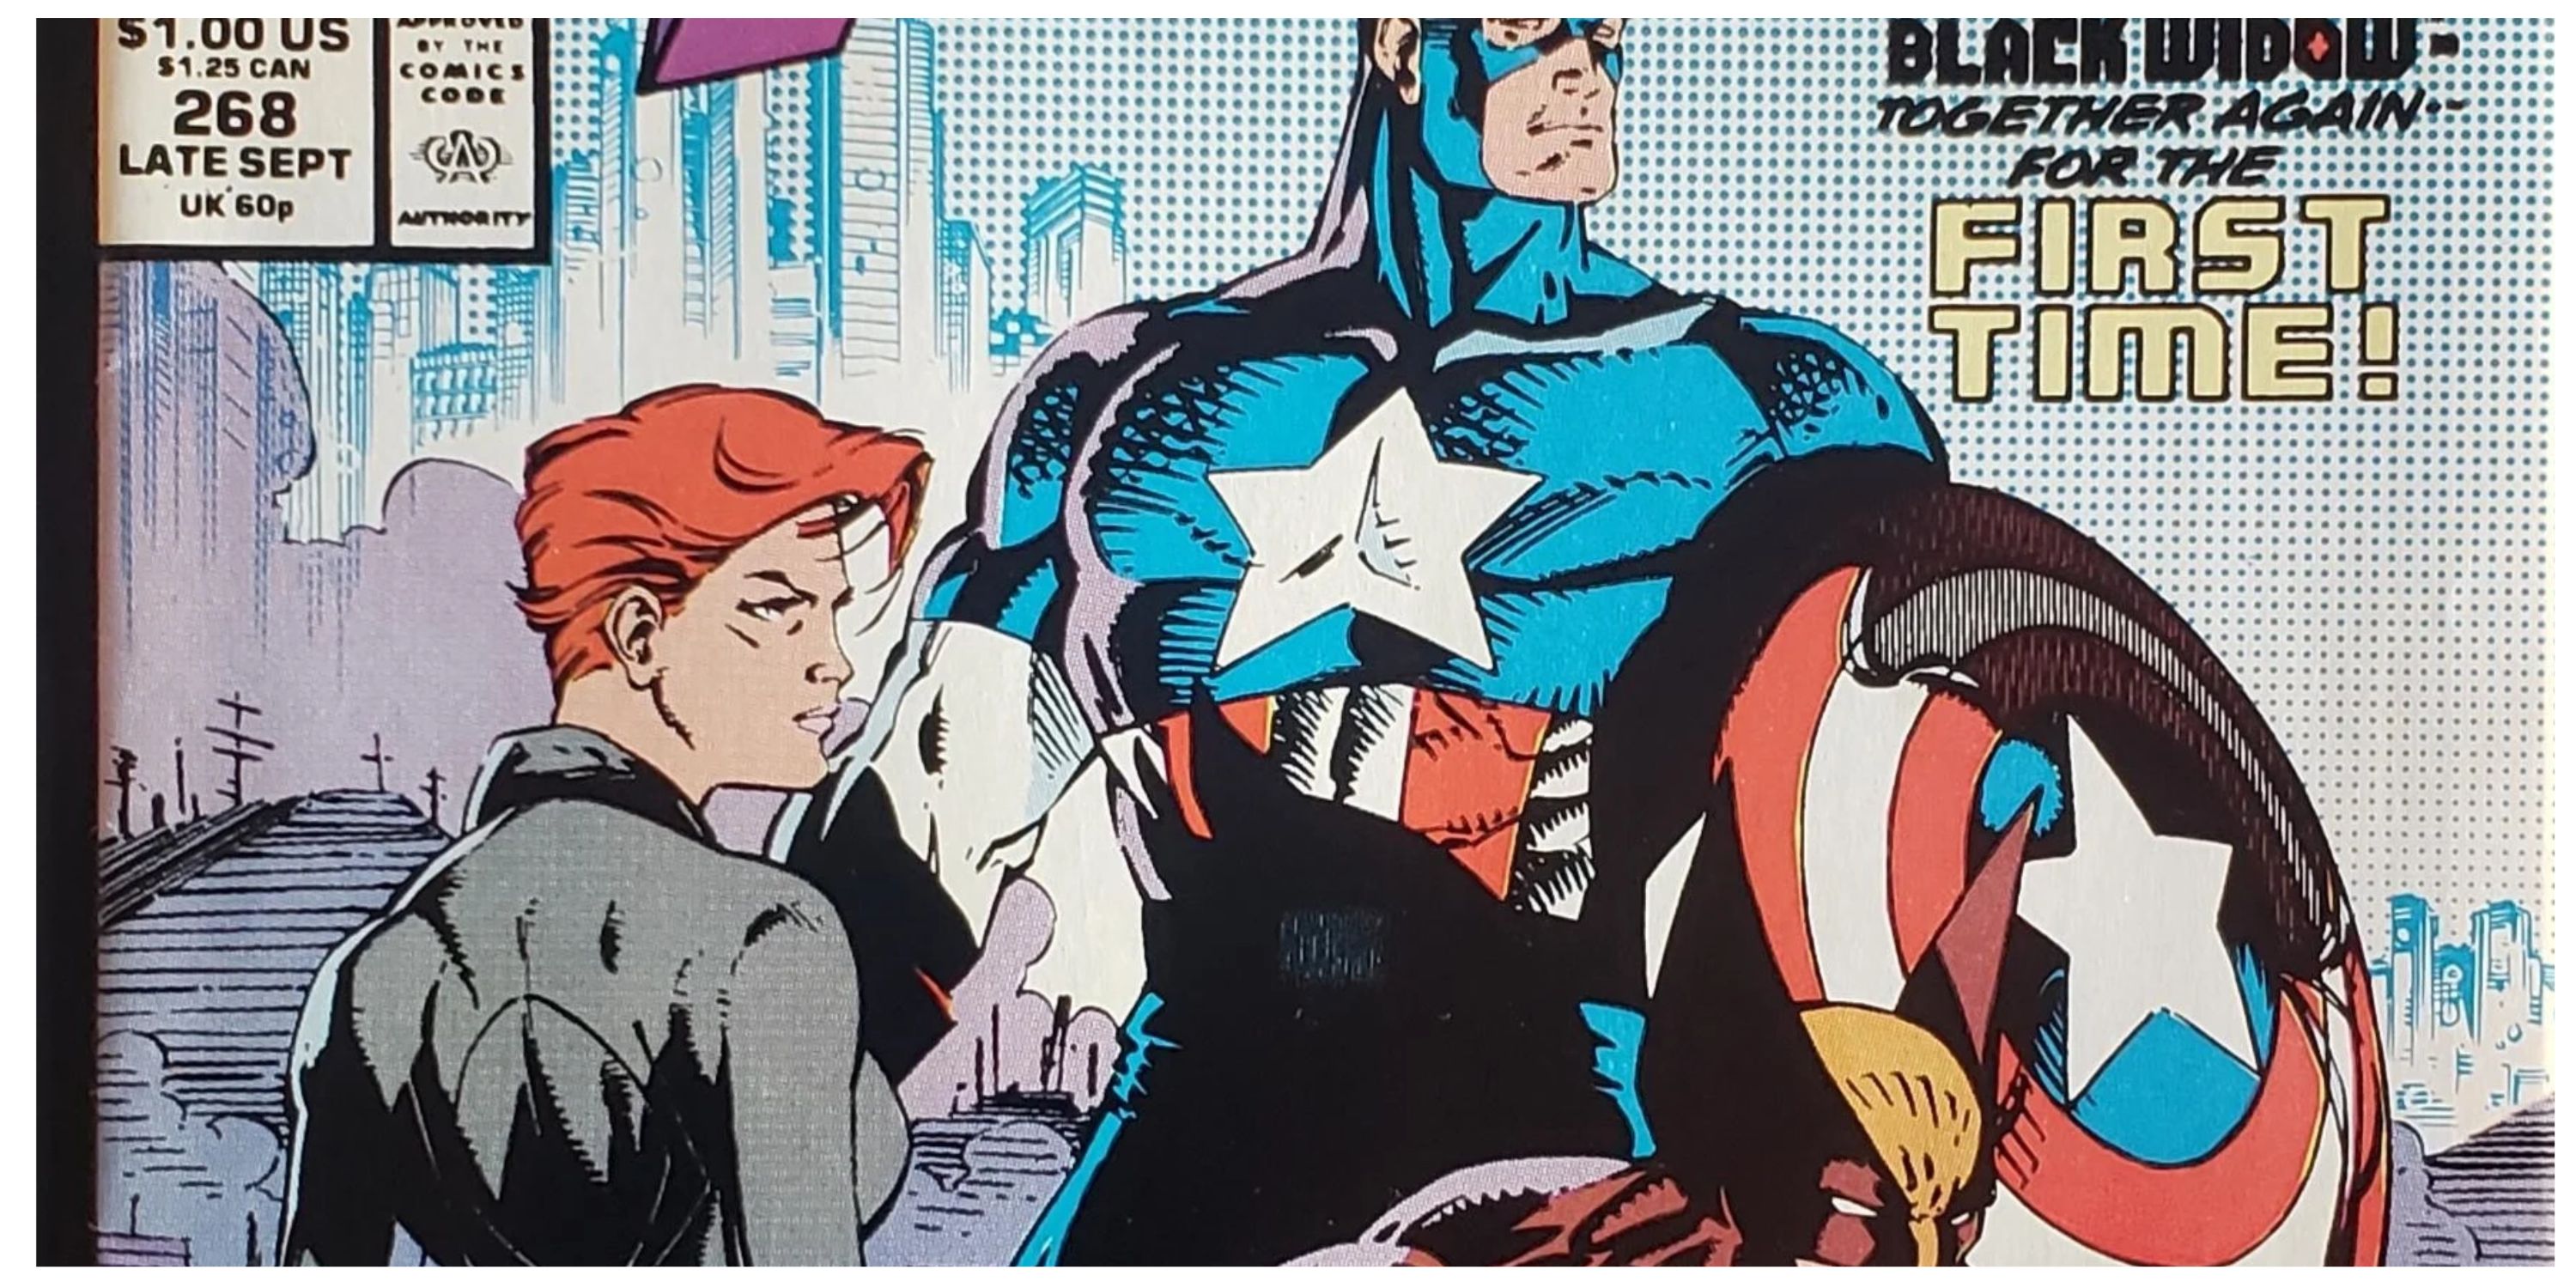 The Black Widow standing with Captain America on an Uncanny X-Men cover